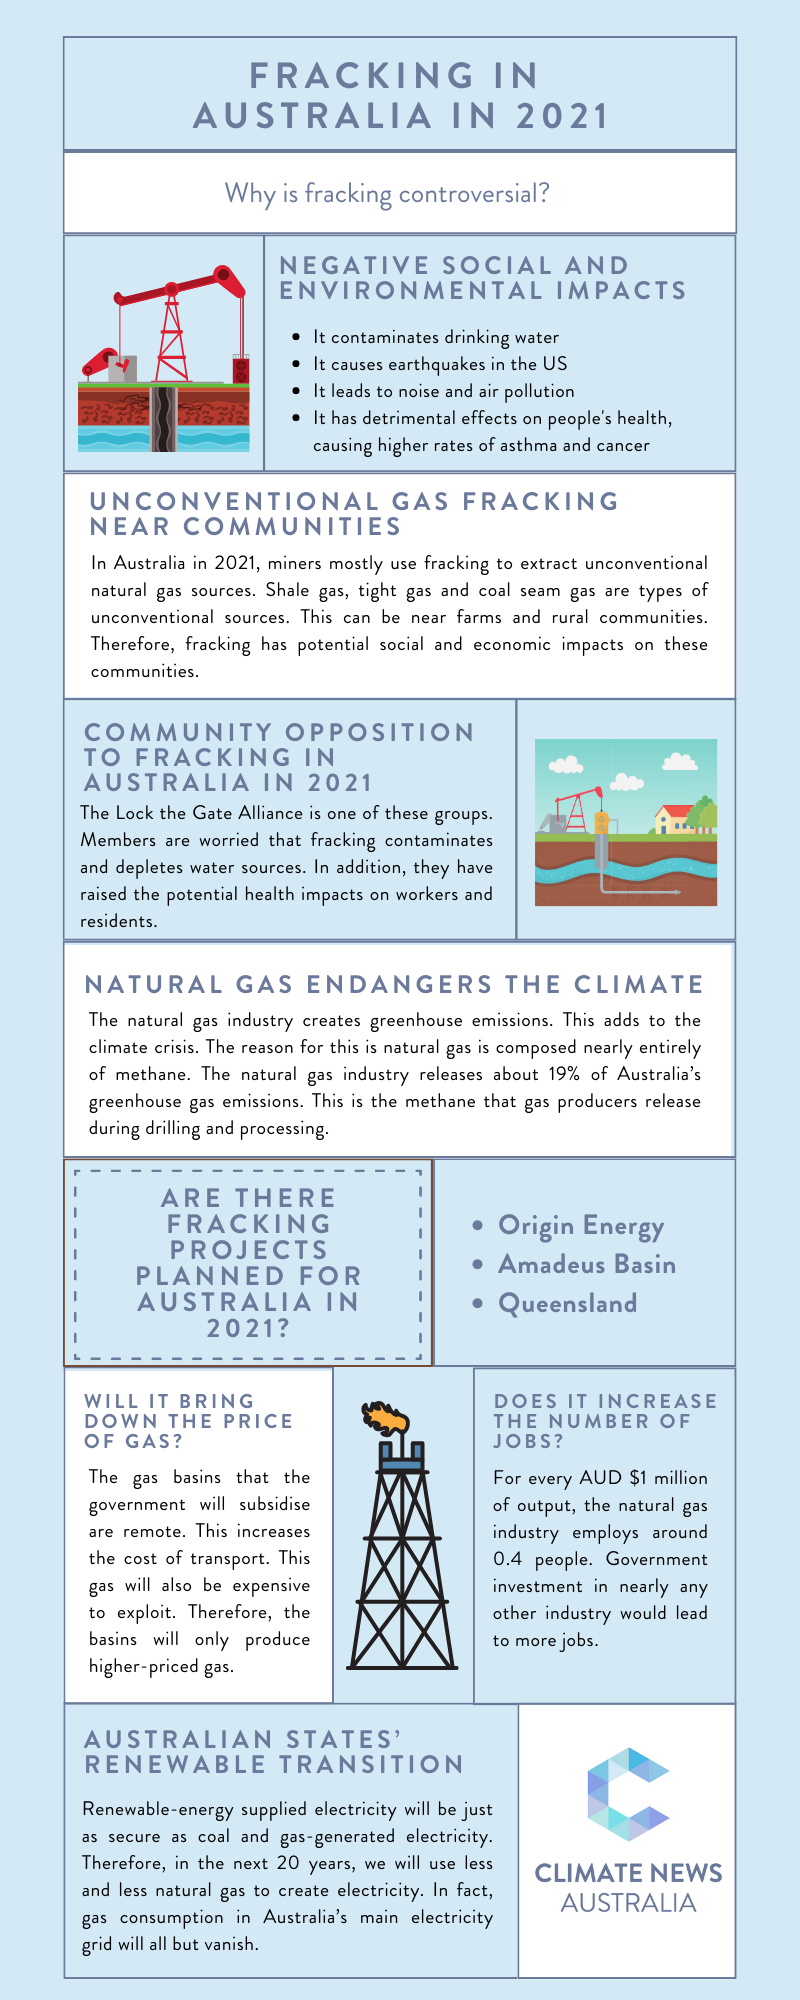 Infographic about fracking in Australia in 2021